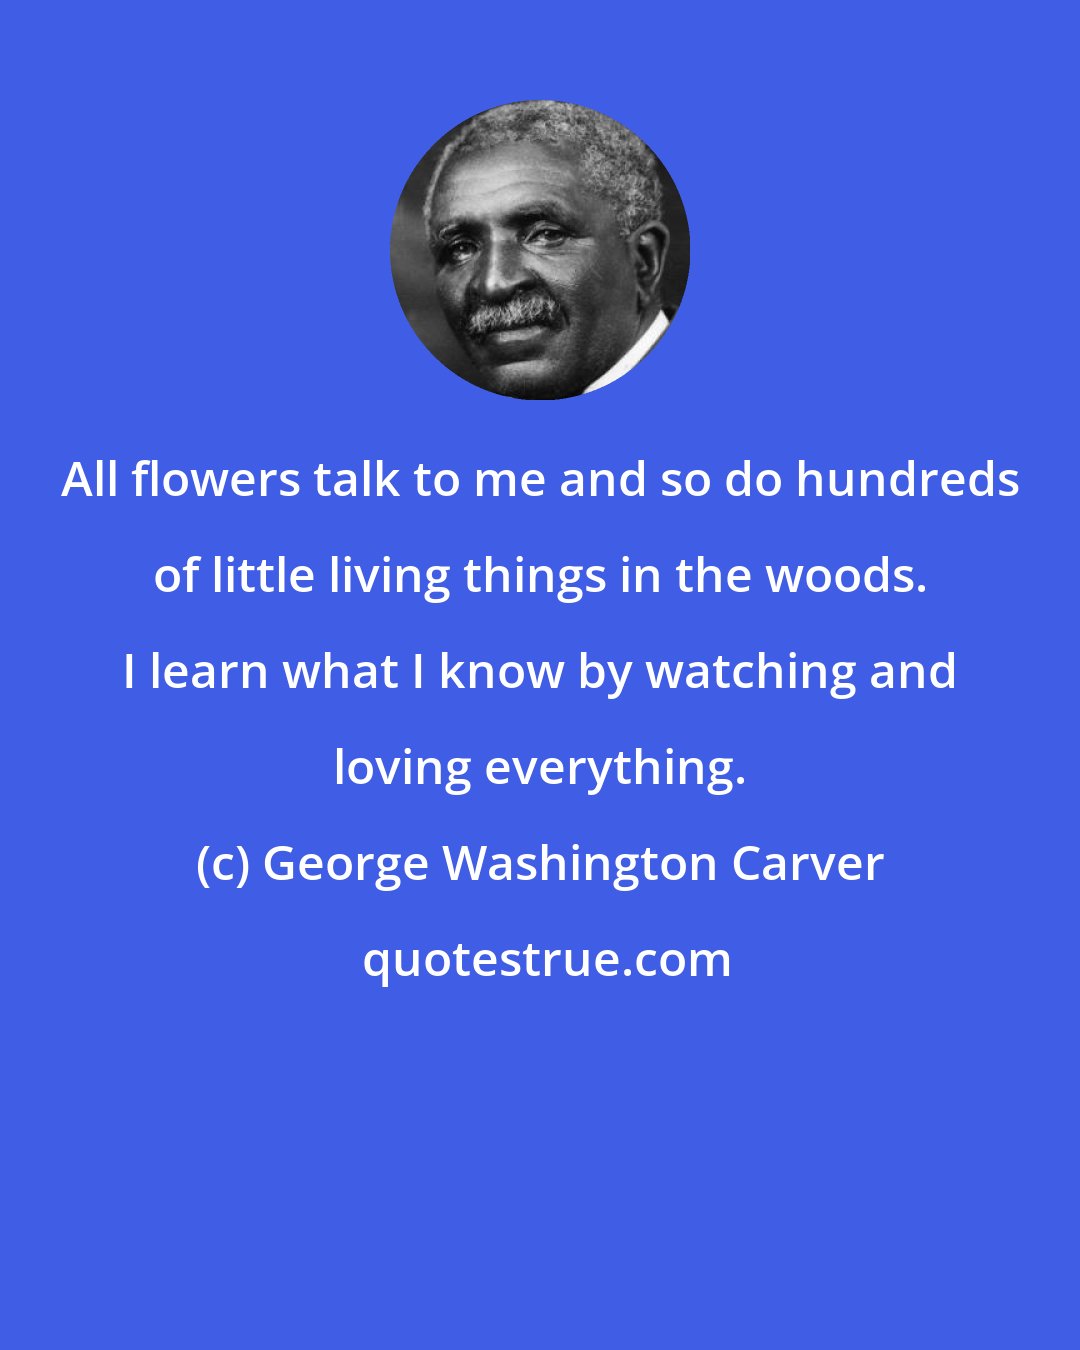 George Washington Carver: All flowers talk to me and so do hundreds of little living things in the woods. I learn what I know by watching and loving everything.